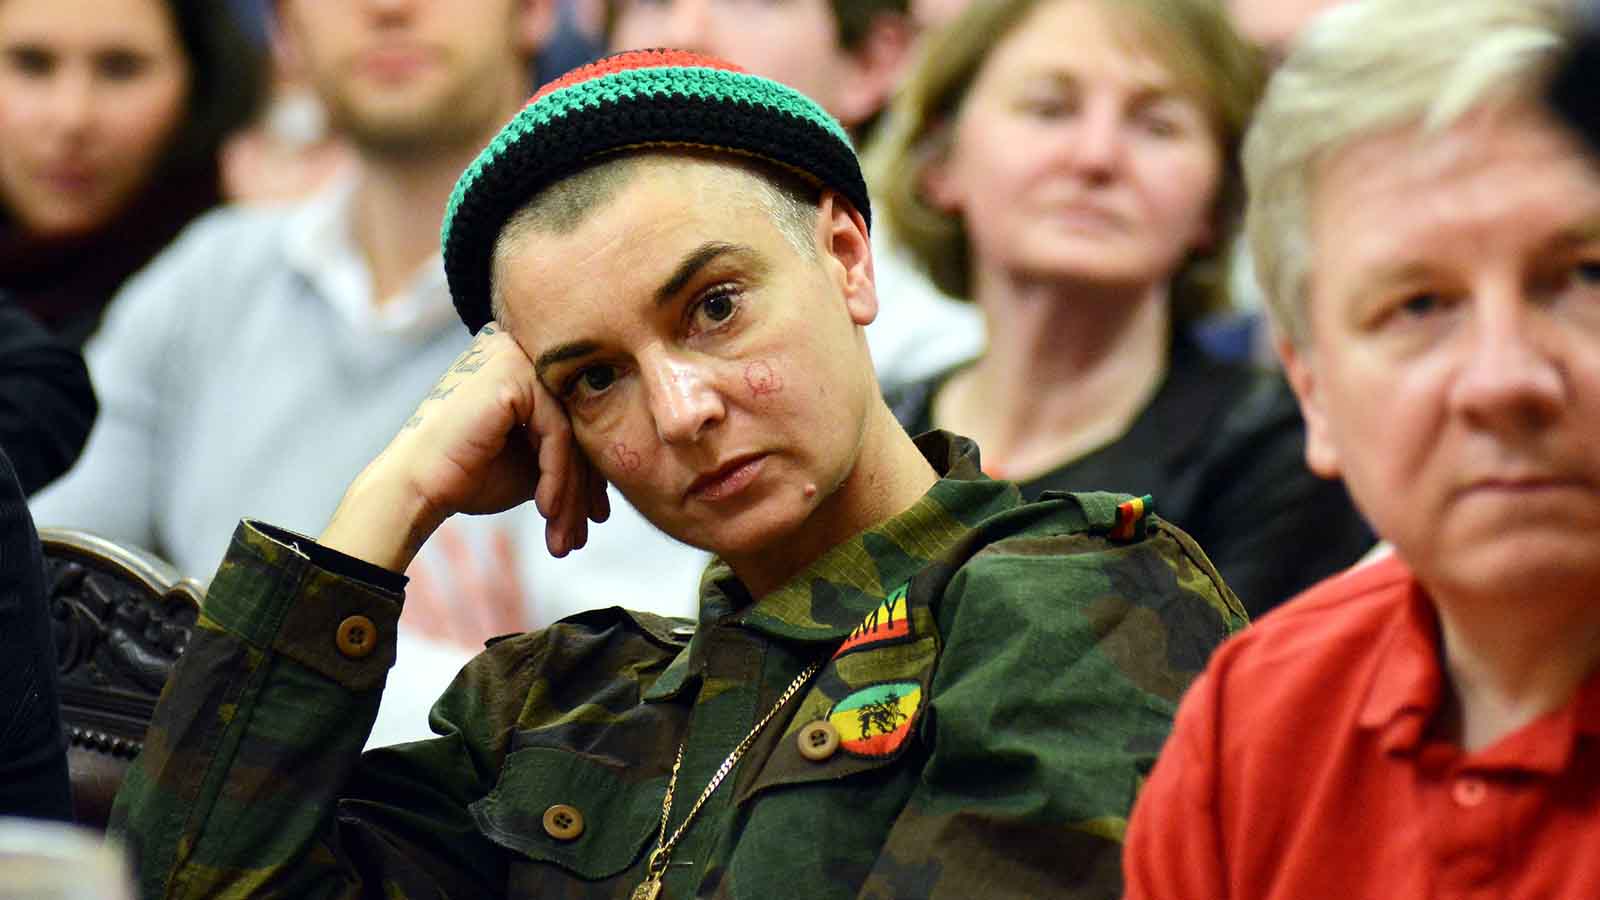 Singer Sinead O'Connor at Trinity College to debate on the Catholic Church with the Historical Society.